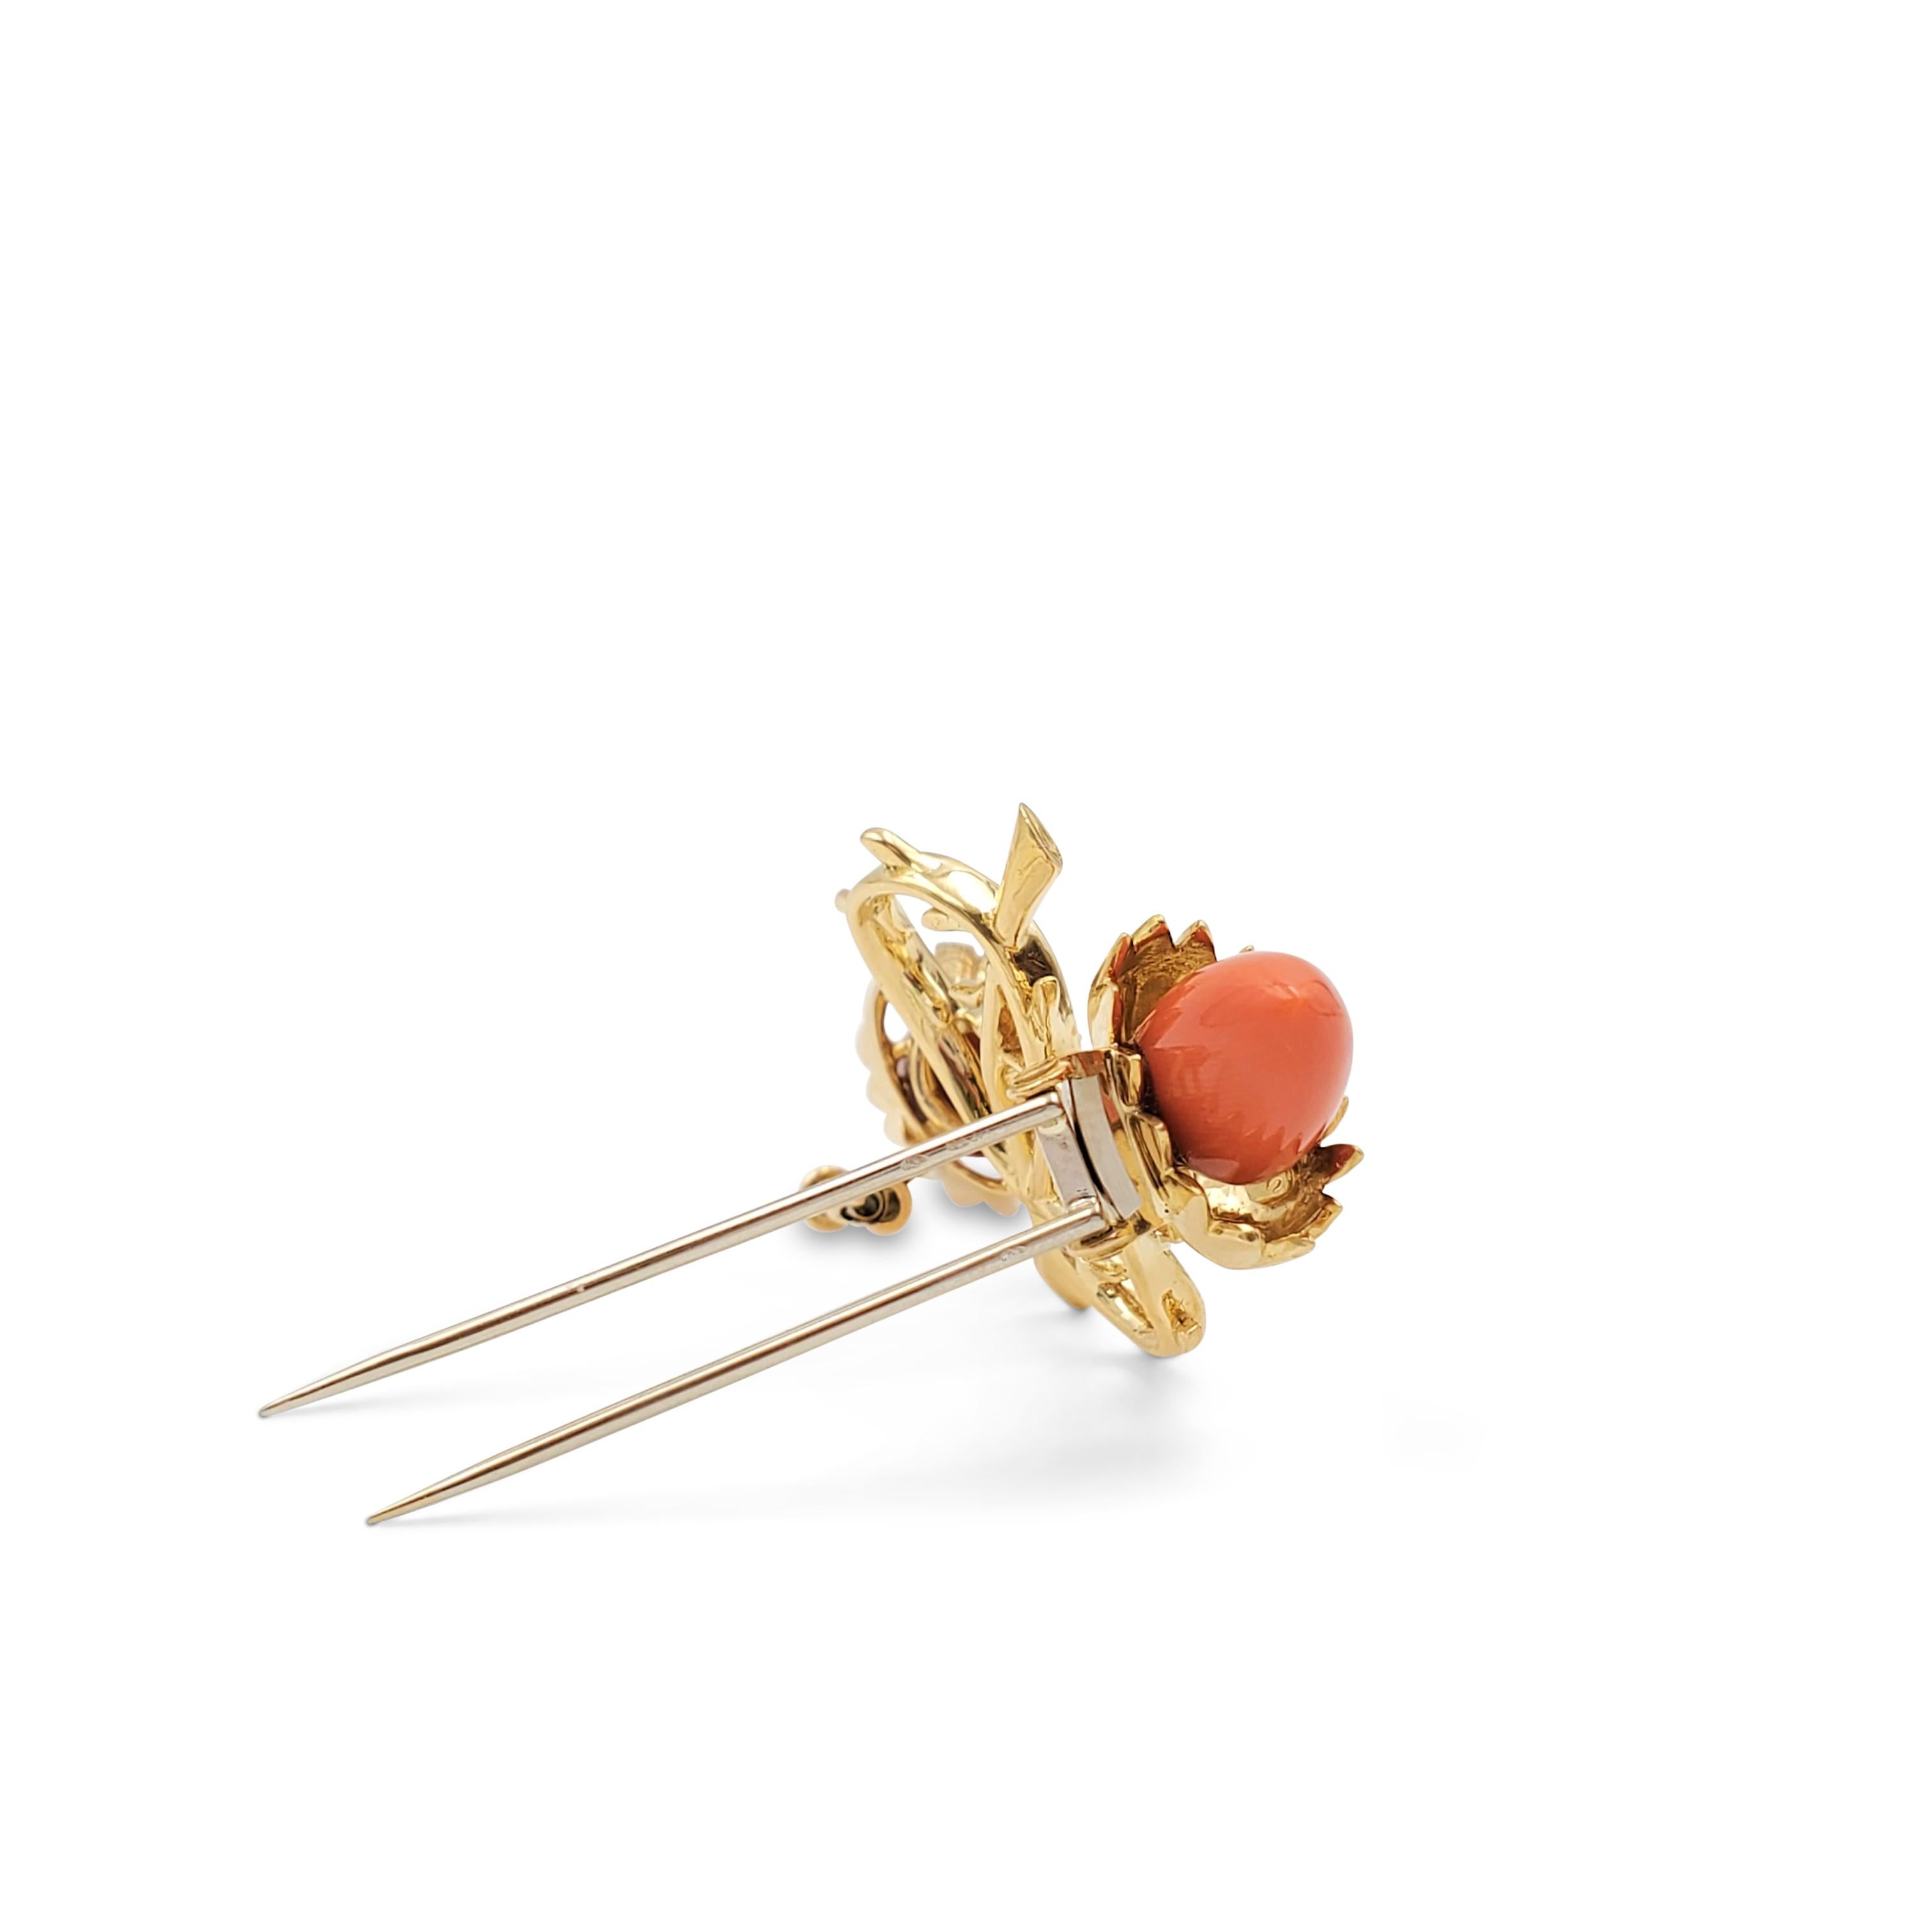 Cabochon Tiffany & Co. Schlumberger Coral Acorn and Foliate Brooch